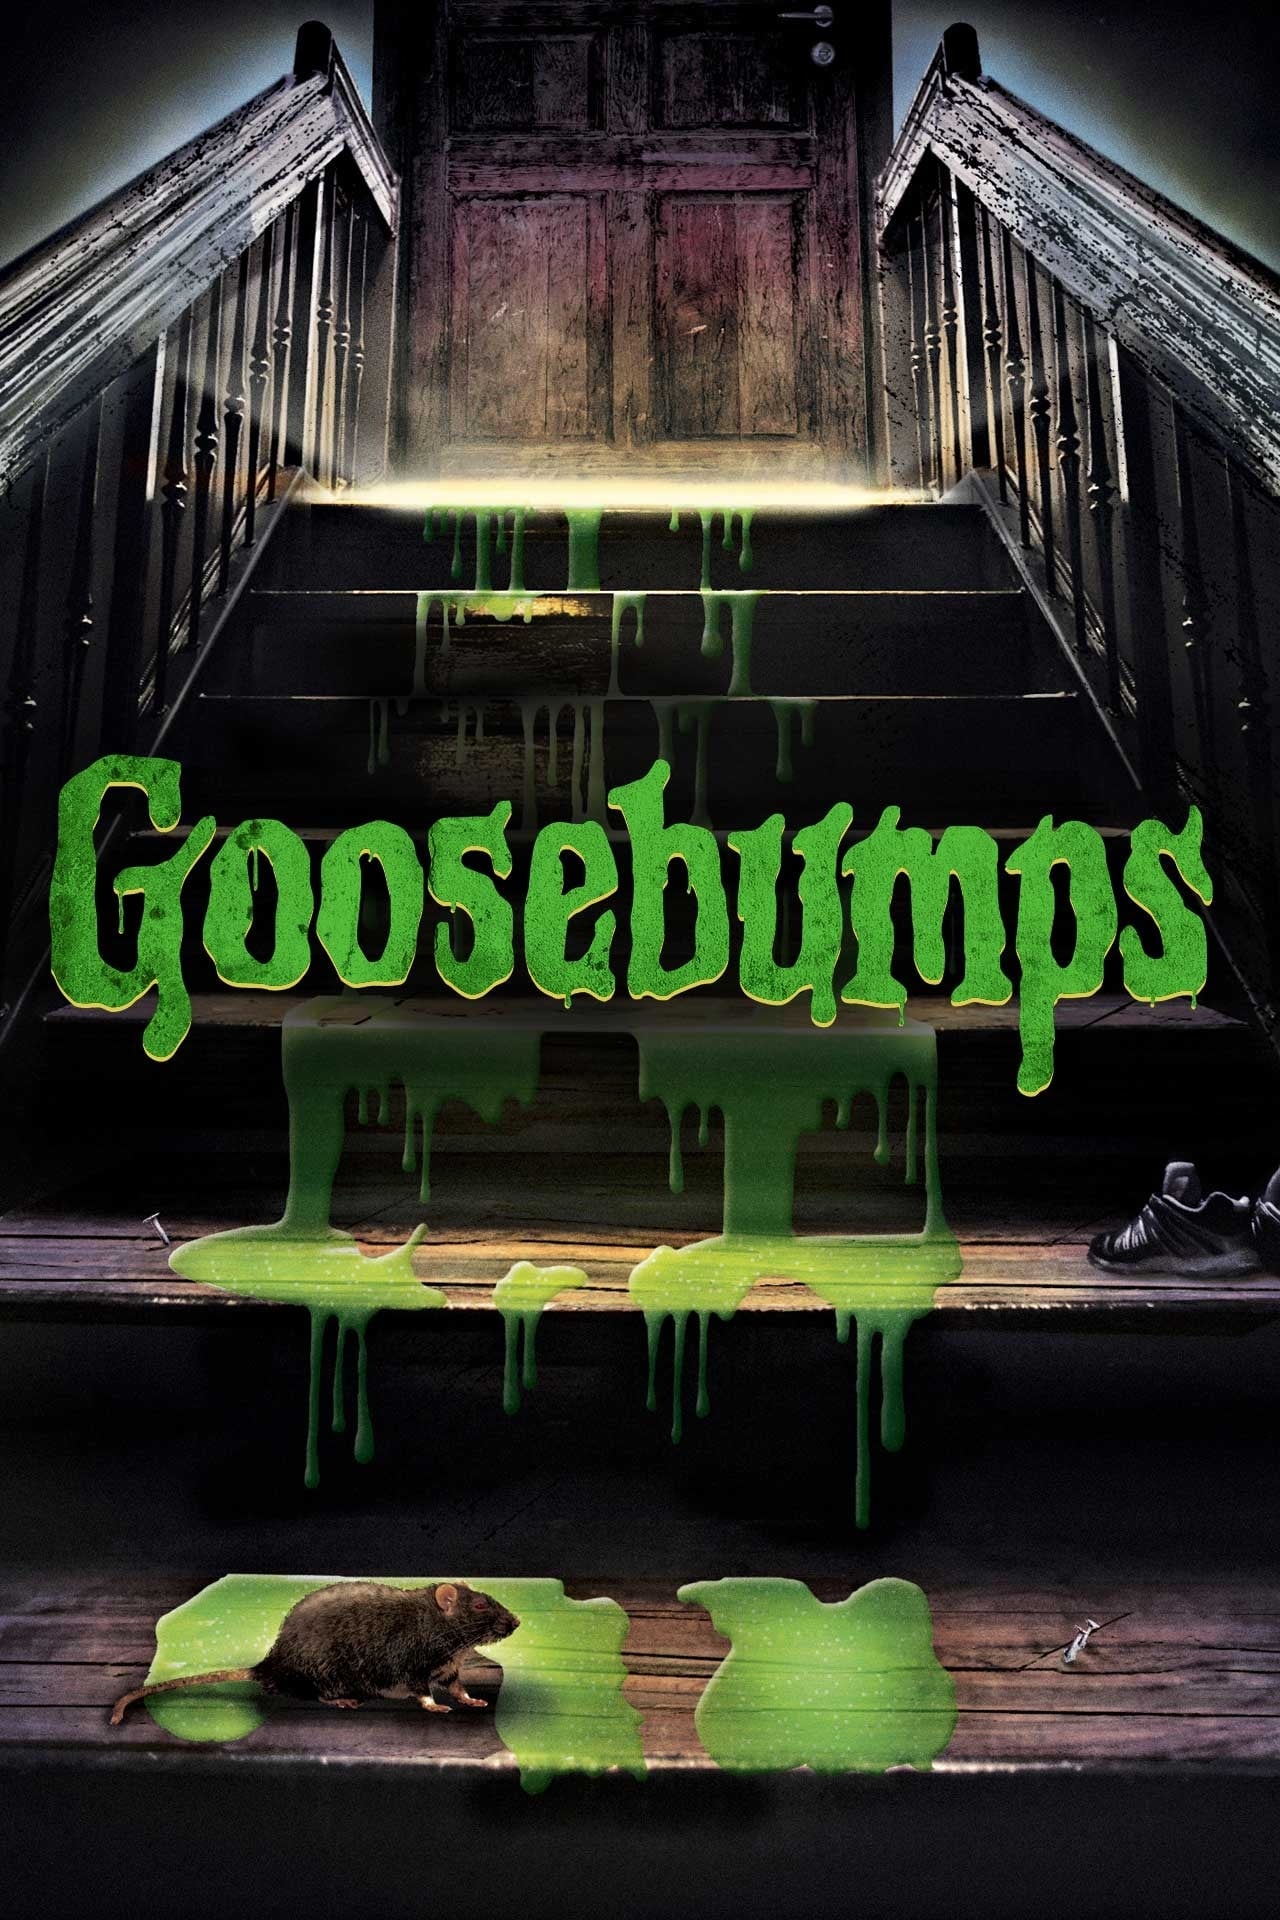 Goosebumps (TV Series): Poster, A horror book, 1995-1998, Spooky thriller, New Face, Old Nightmare. 1280x1920 HD Wallpaper.